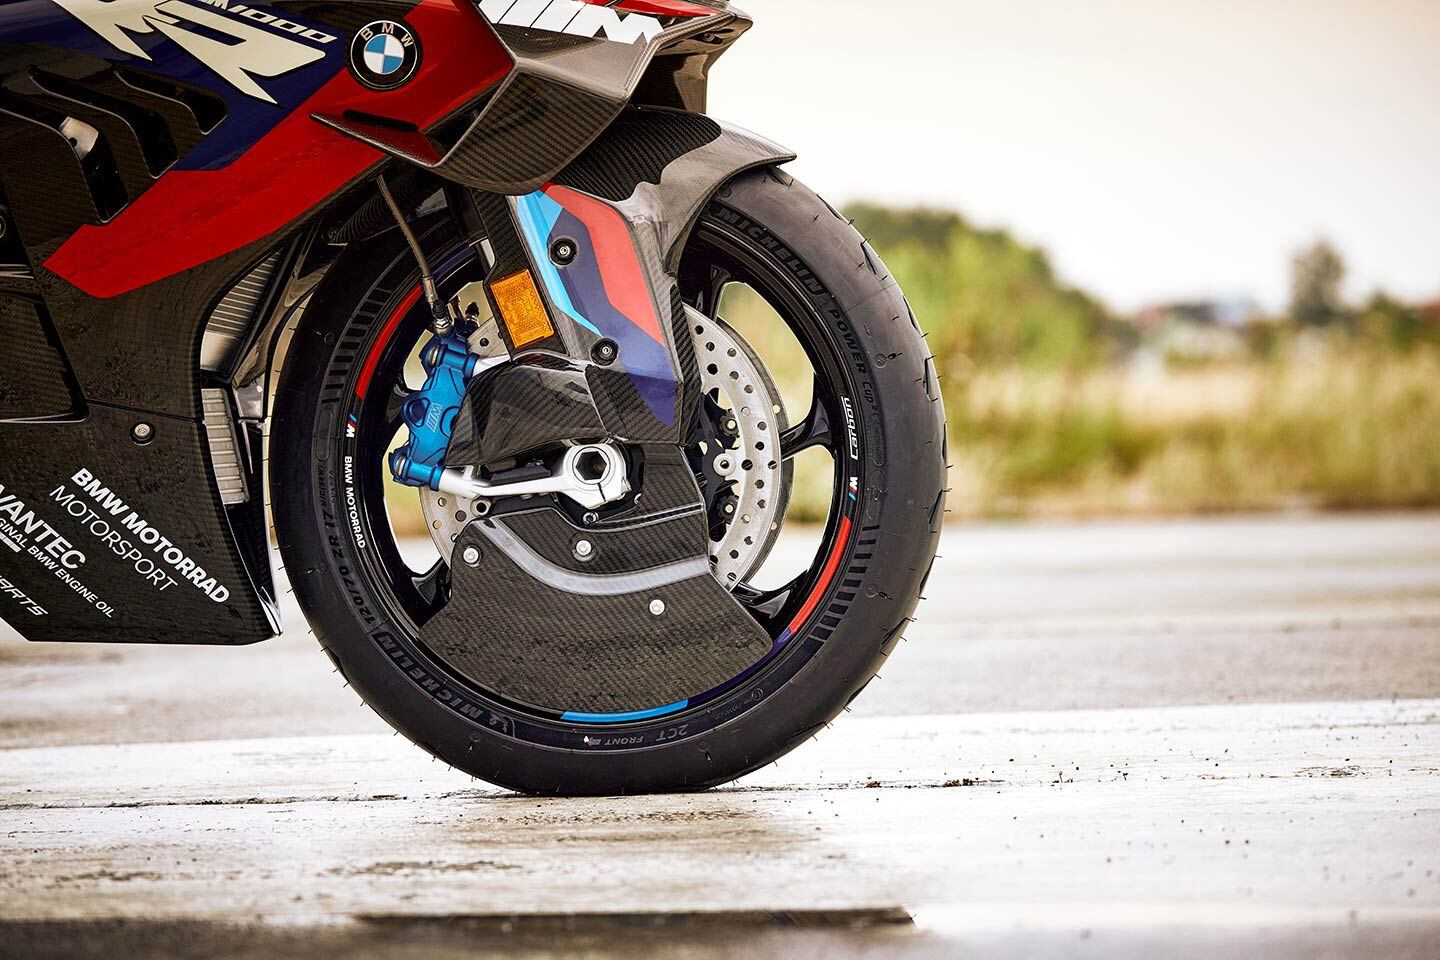 Cooling ducts reduce the M 1000 RR’s front caliper temperature up to 50 degrees Fahrenheit on the track.